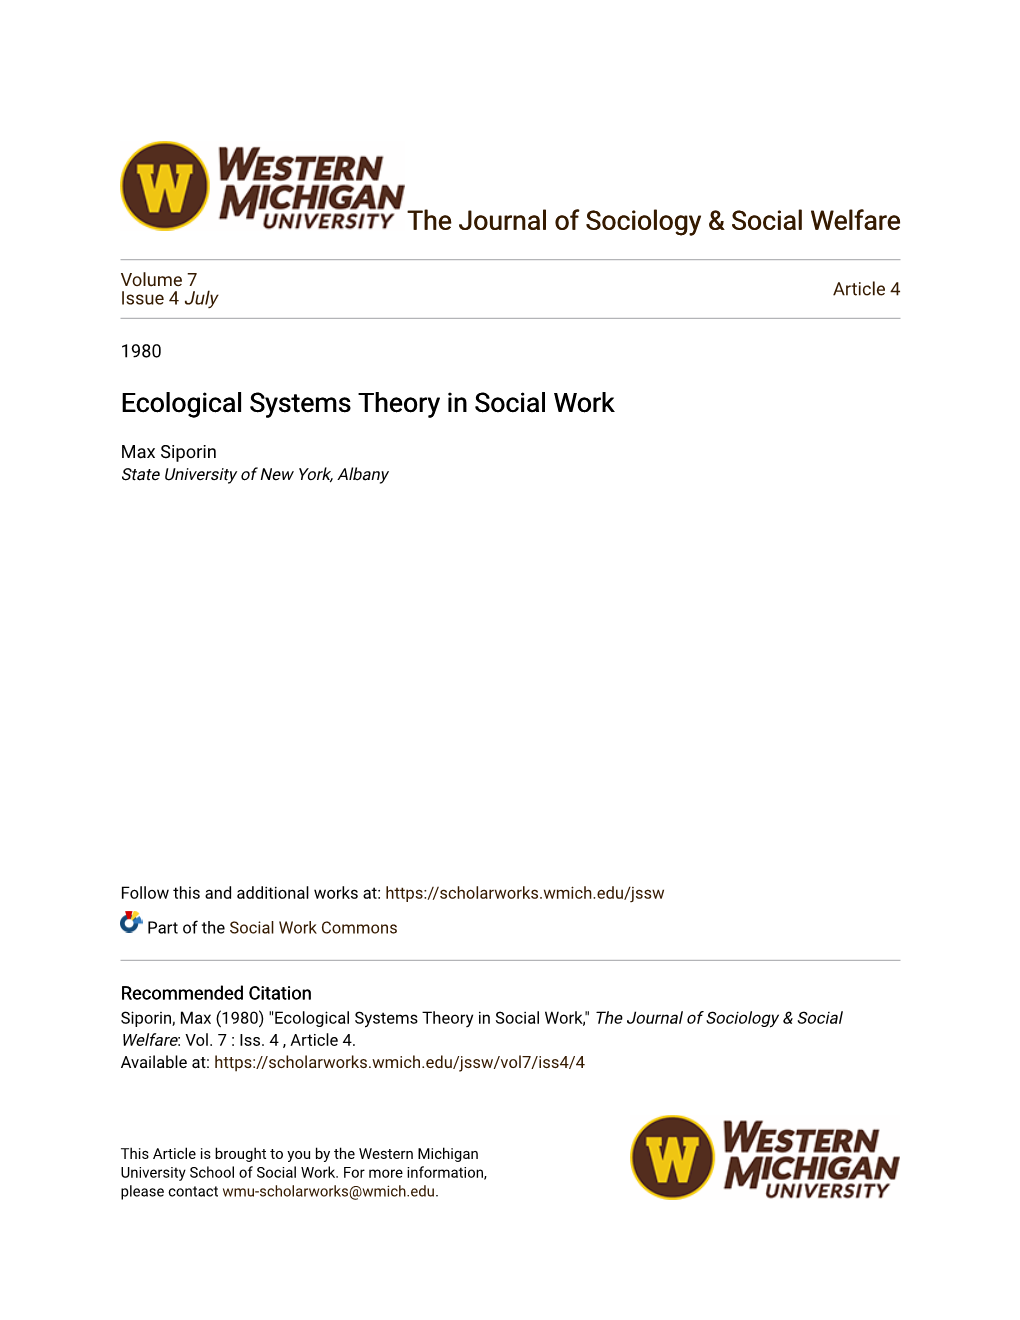 Ecological Systems Theory in Social Work